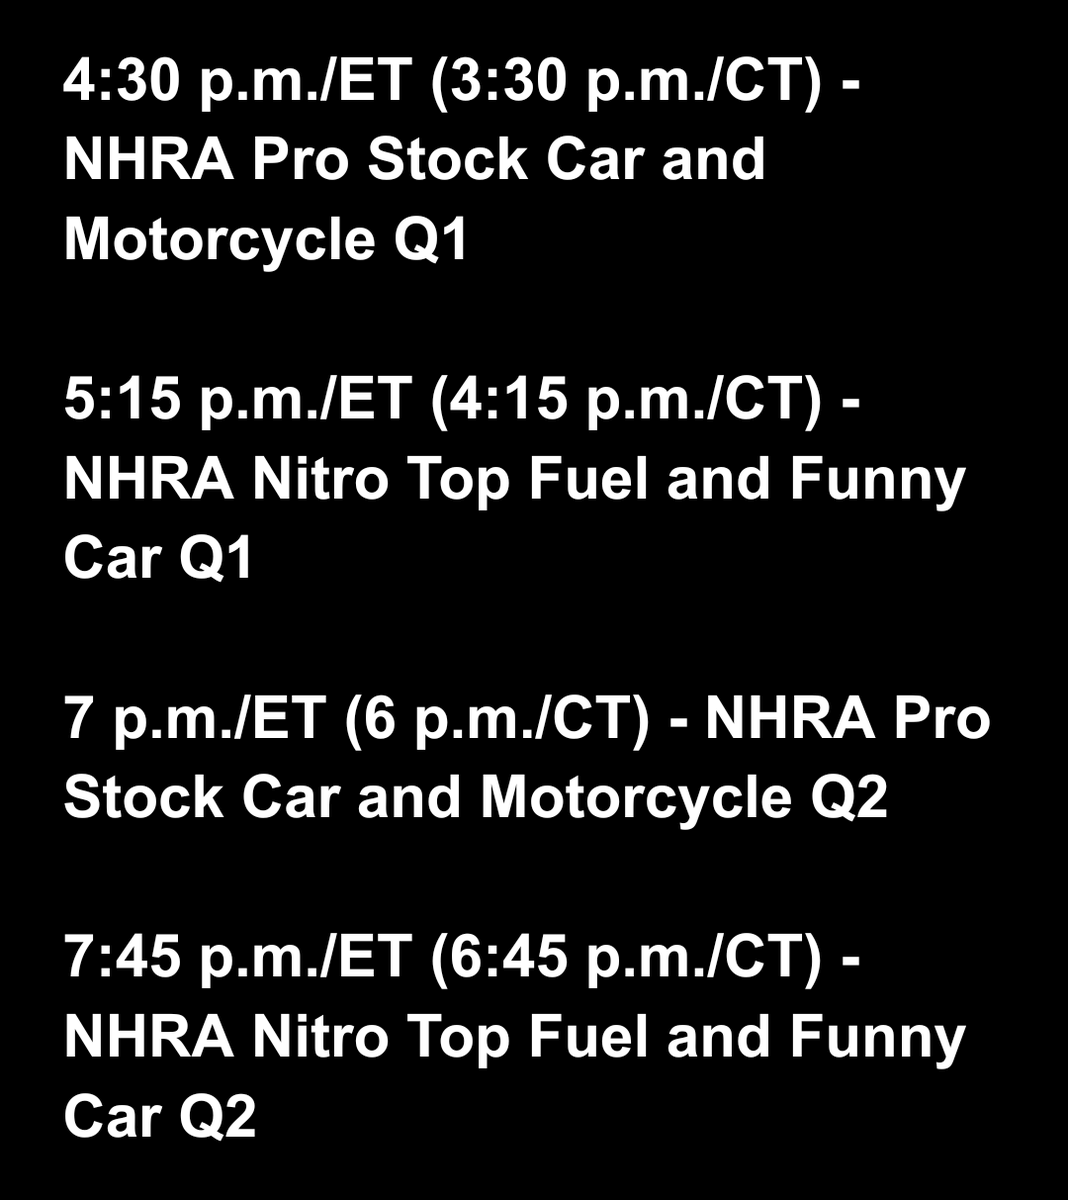 Friday schedule for the #FourWideNats at Charlotte features two qualifying sessions, one during the day and one at night. 

#NHRA